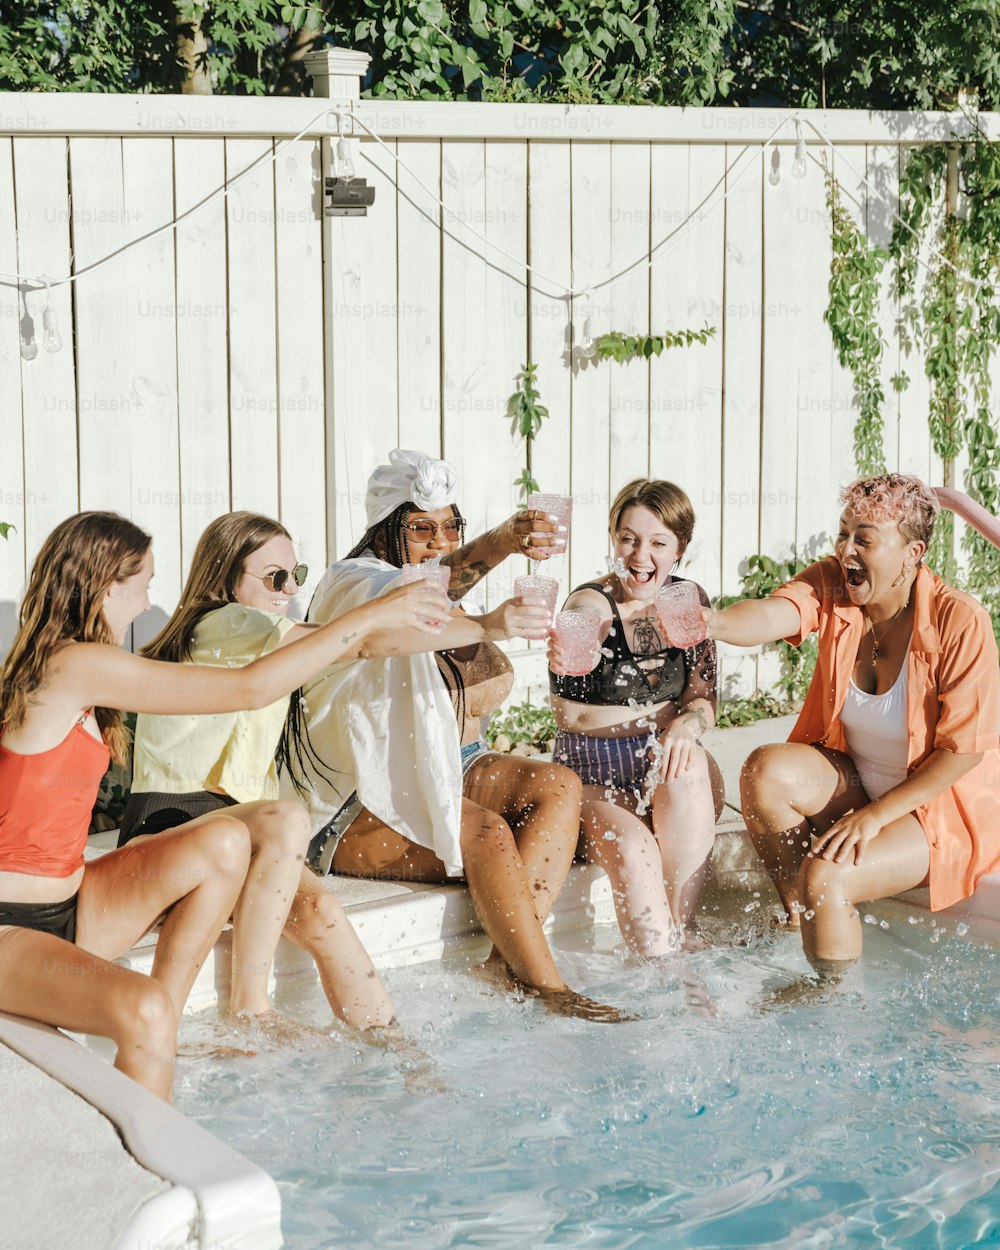 a group of young women sitting in a pool of water